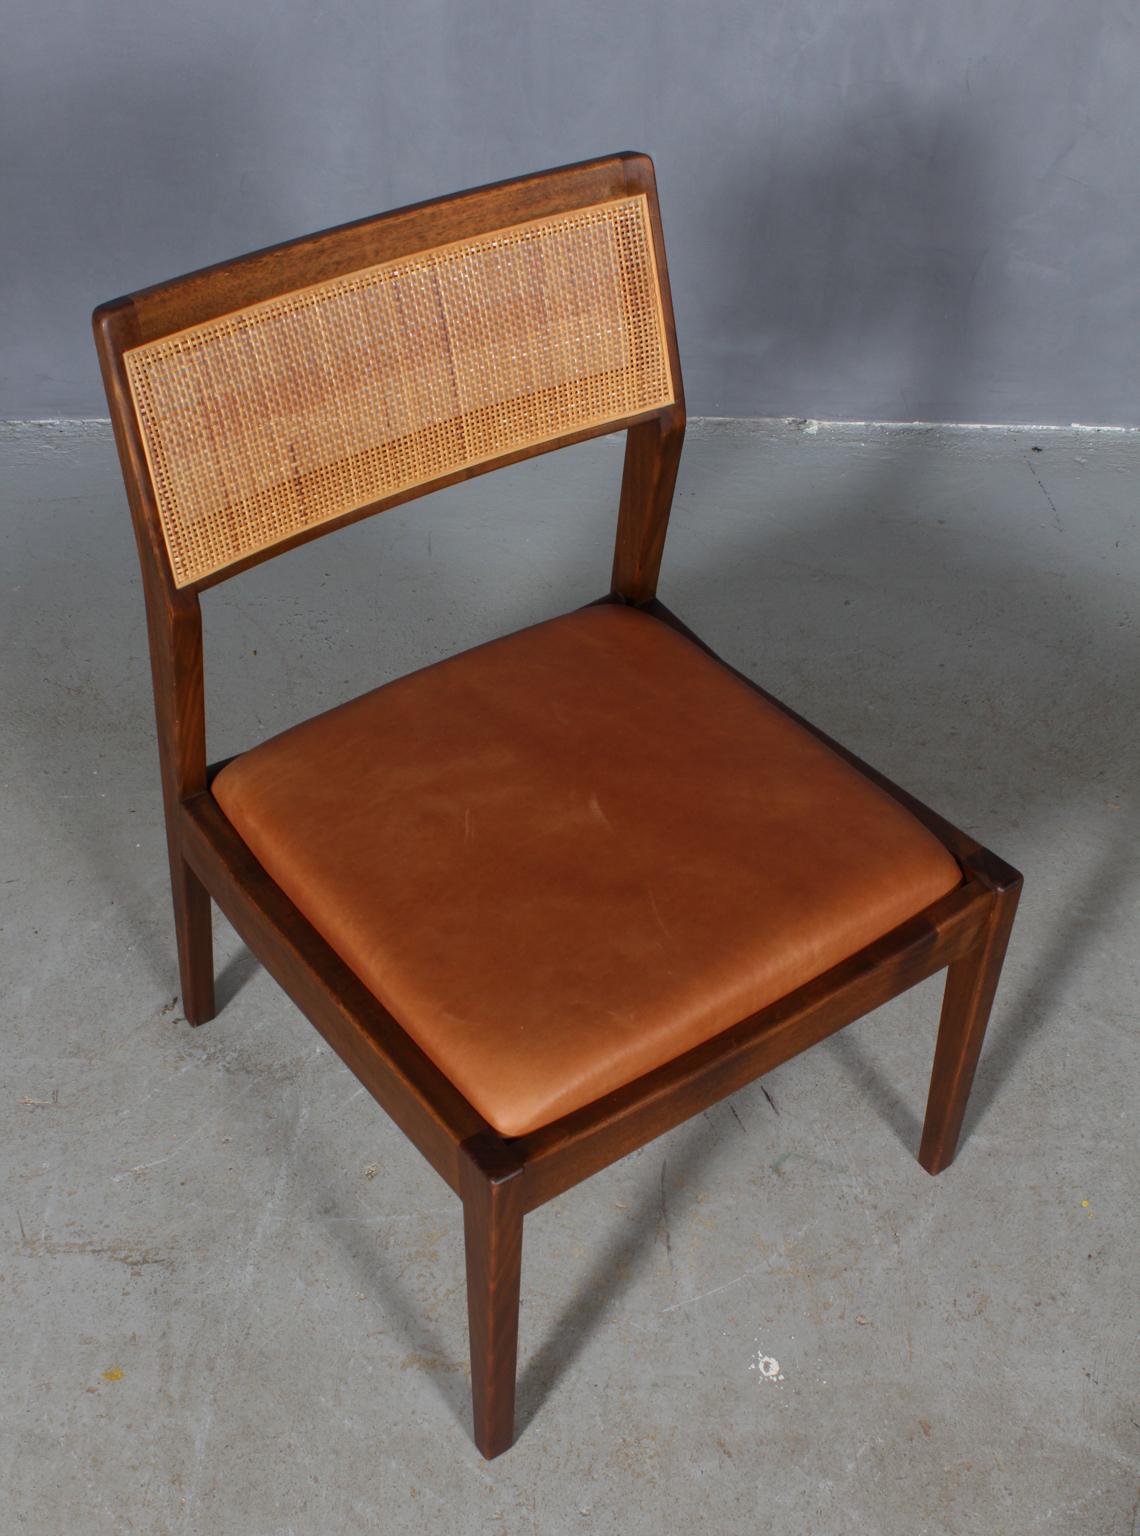 Jens Risom lounge chair in teak. Back with cane.

New upholstered with tan vintage aniline leather. 

Model C240.